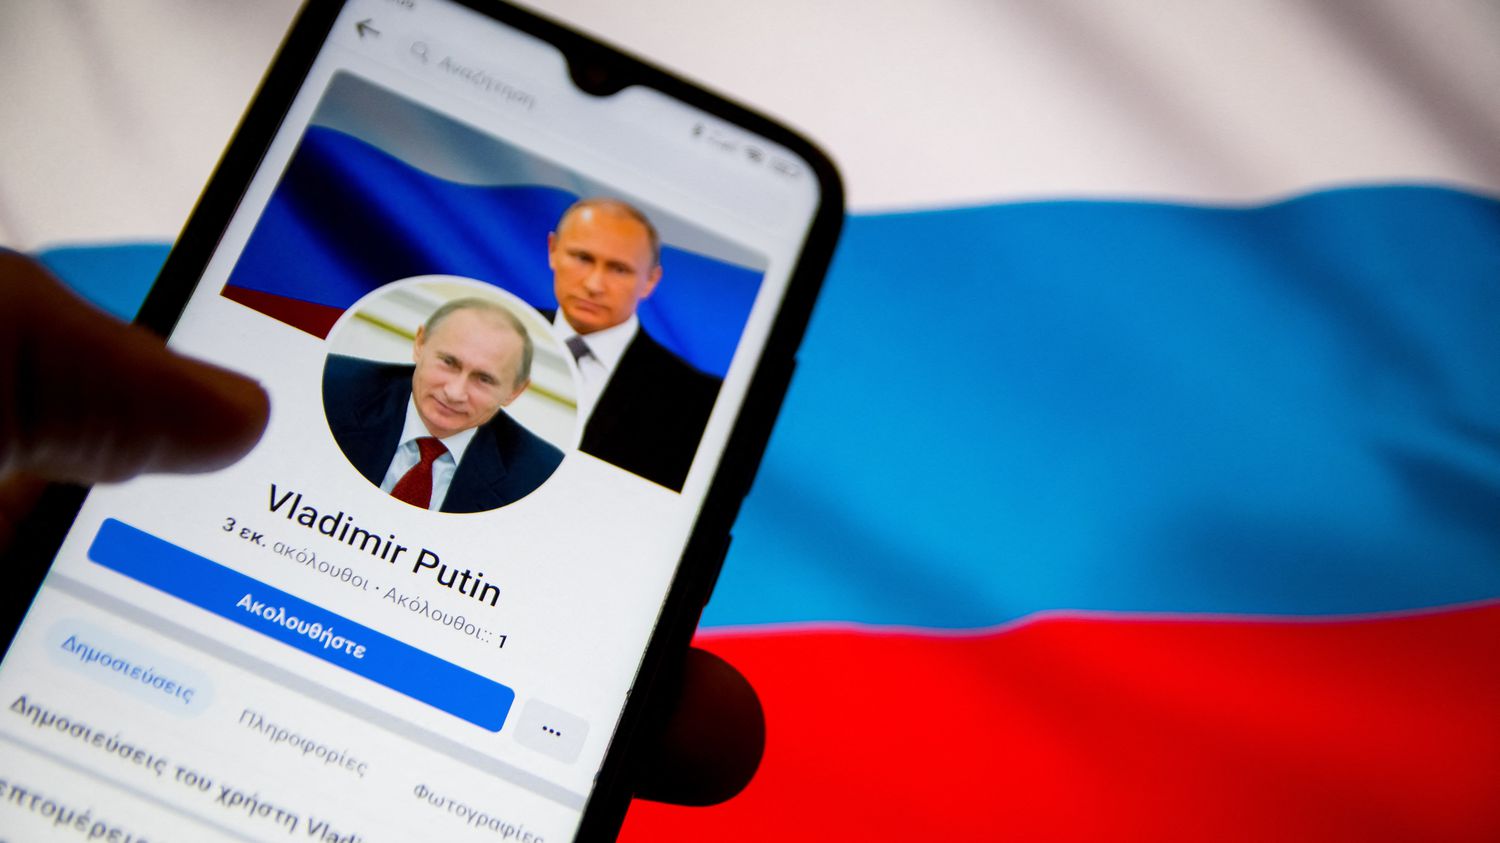 War in Ukraine Russia limits access to Facebook accused of